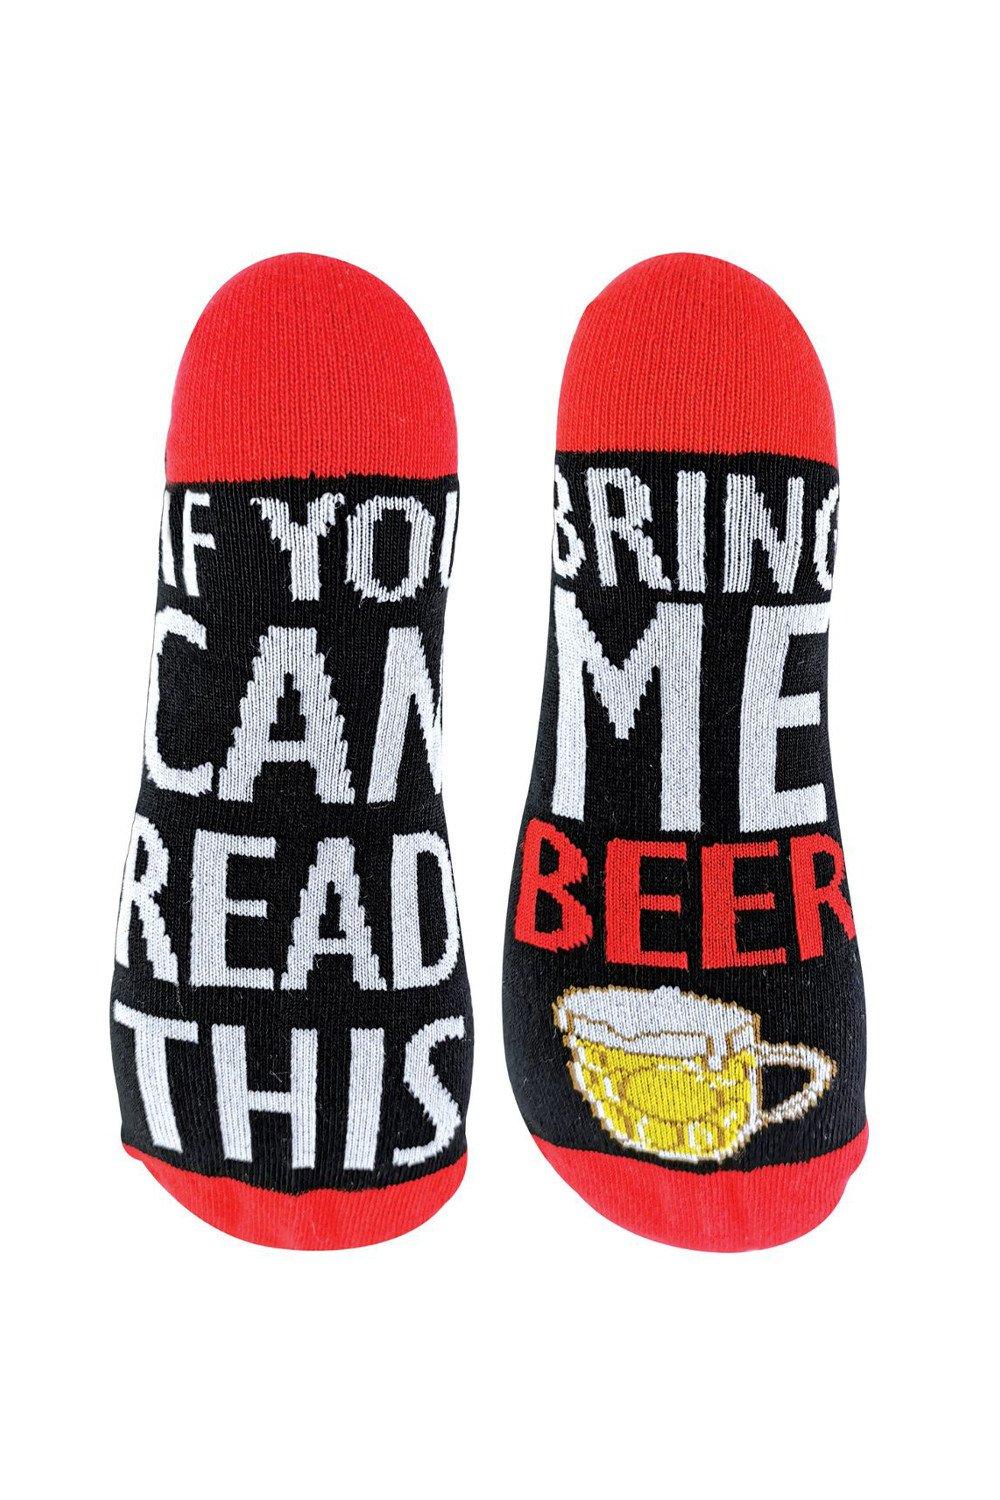 If You Can Read This Socks Bring Me - Wine Beer Gin Tea Coffee Pizza